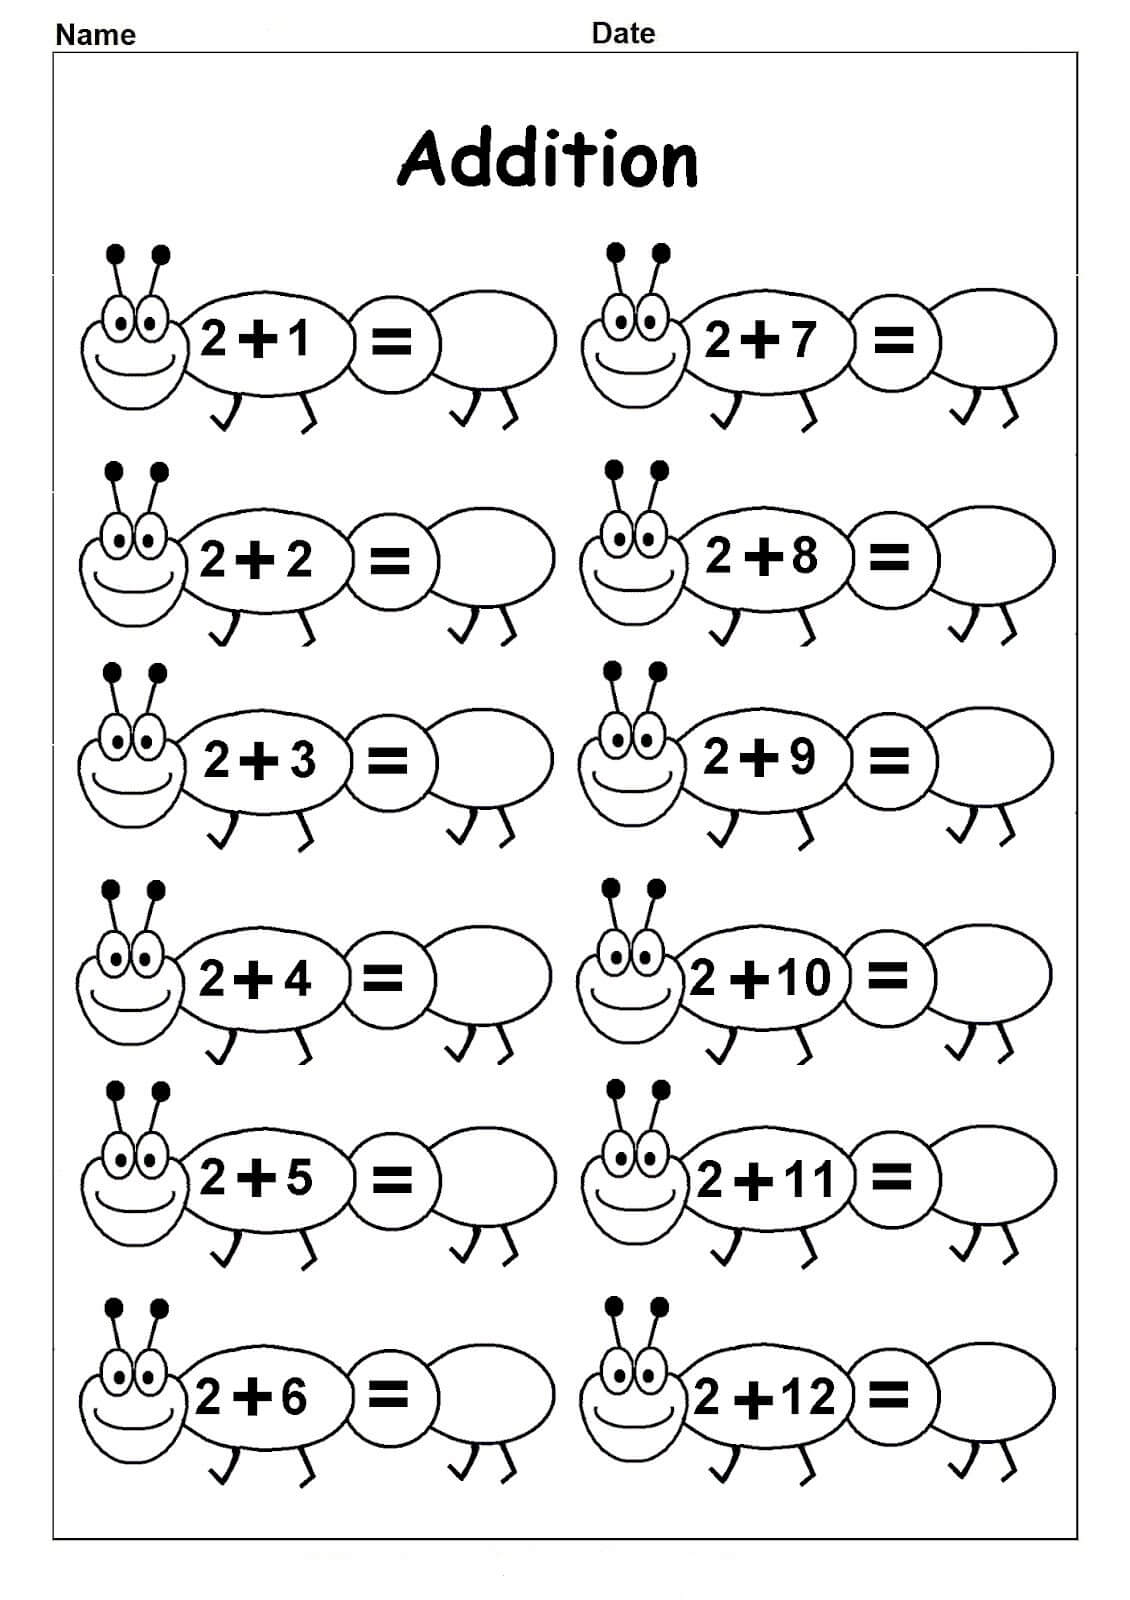 free-printable-easy-addition-worksheet-preschool-crafts-fun-math-worksheets-to-print-activity